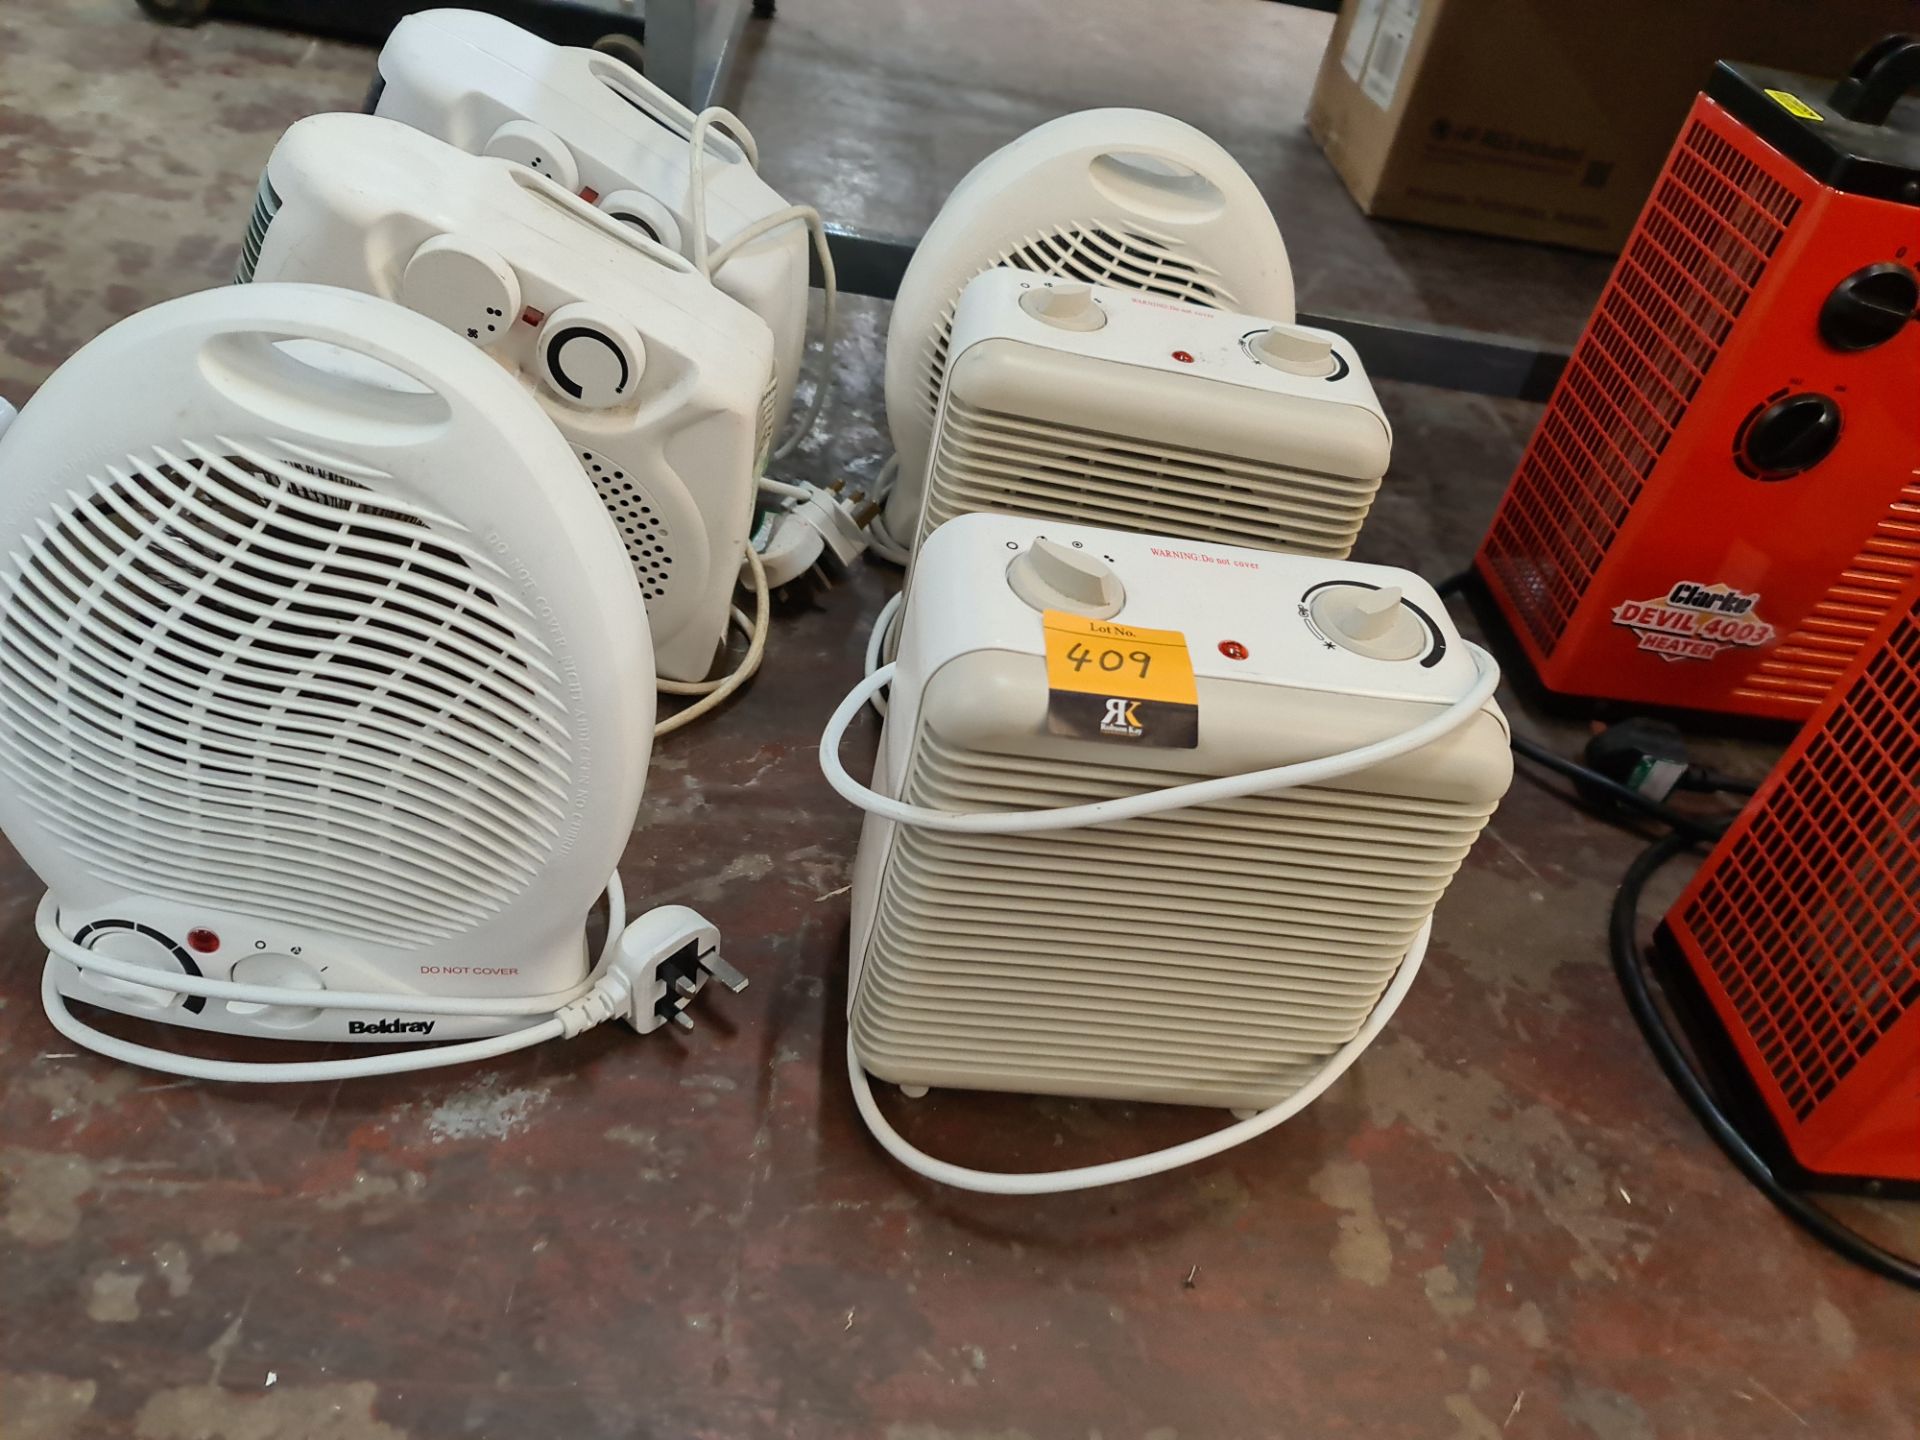 6 off assorted small fan heaters - Image 2 of 9